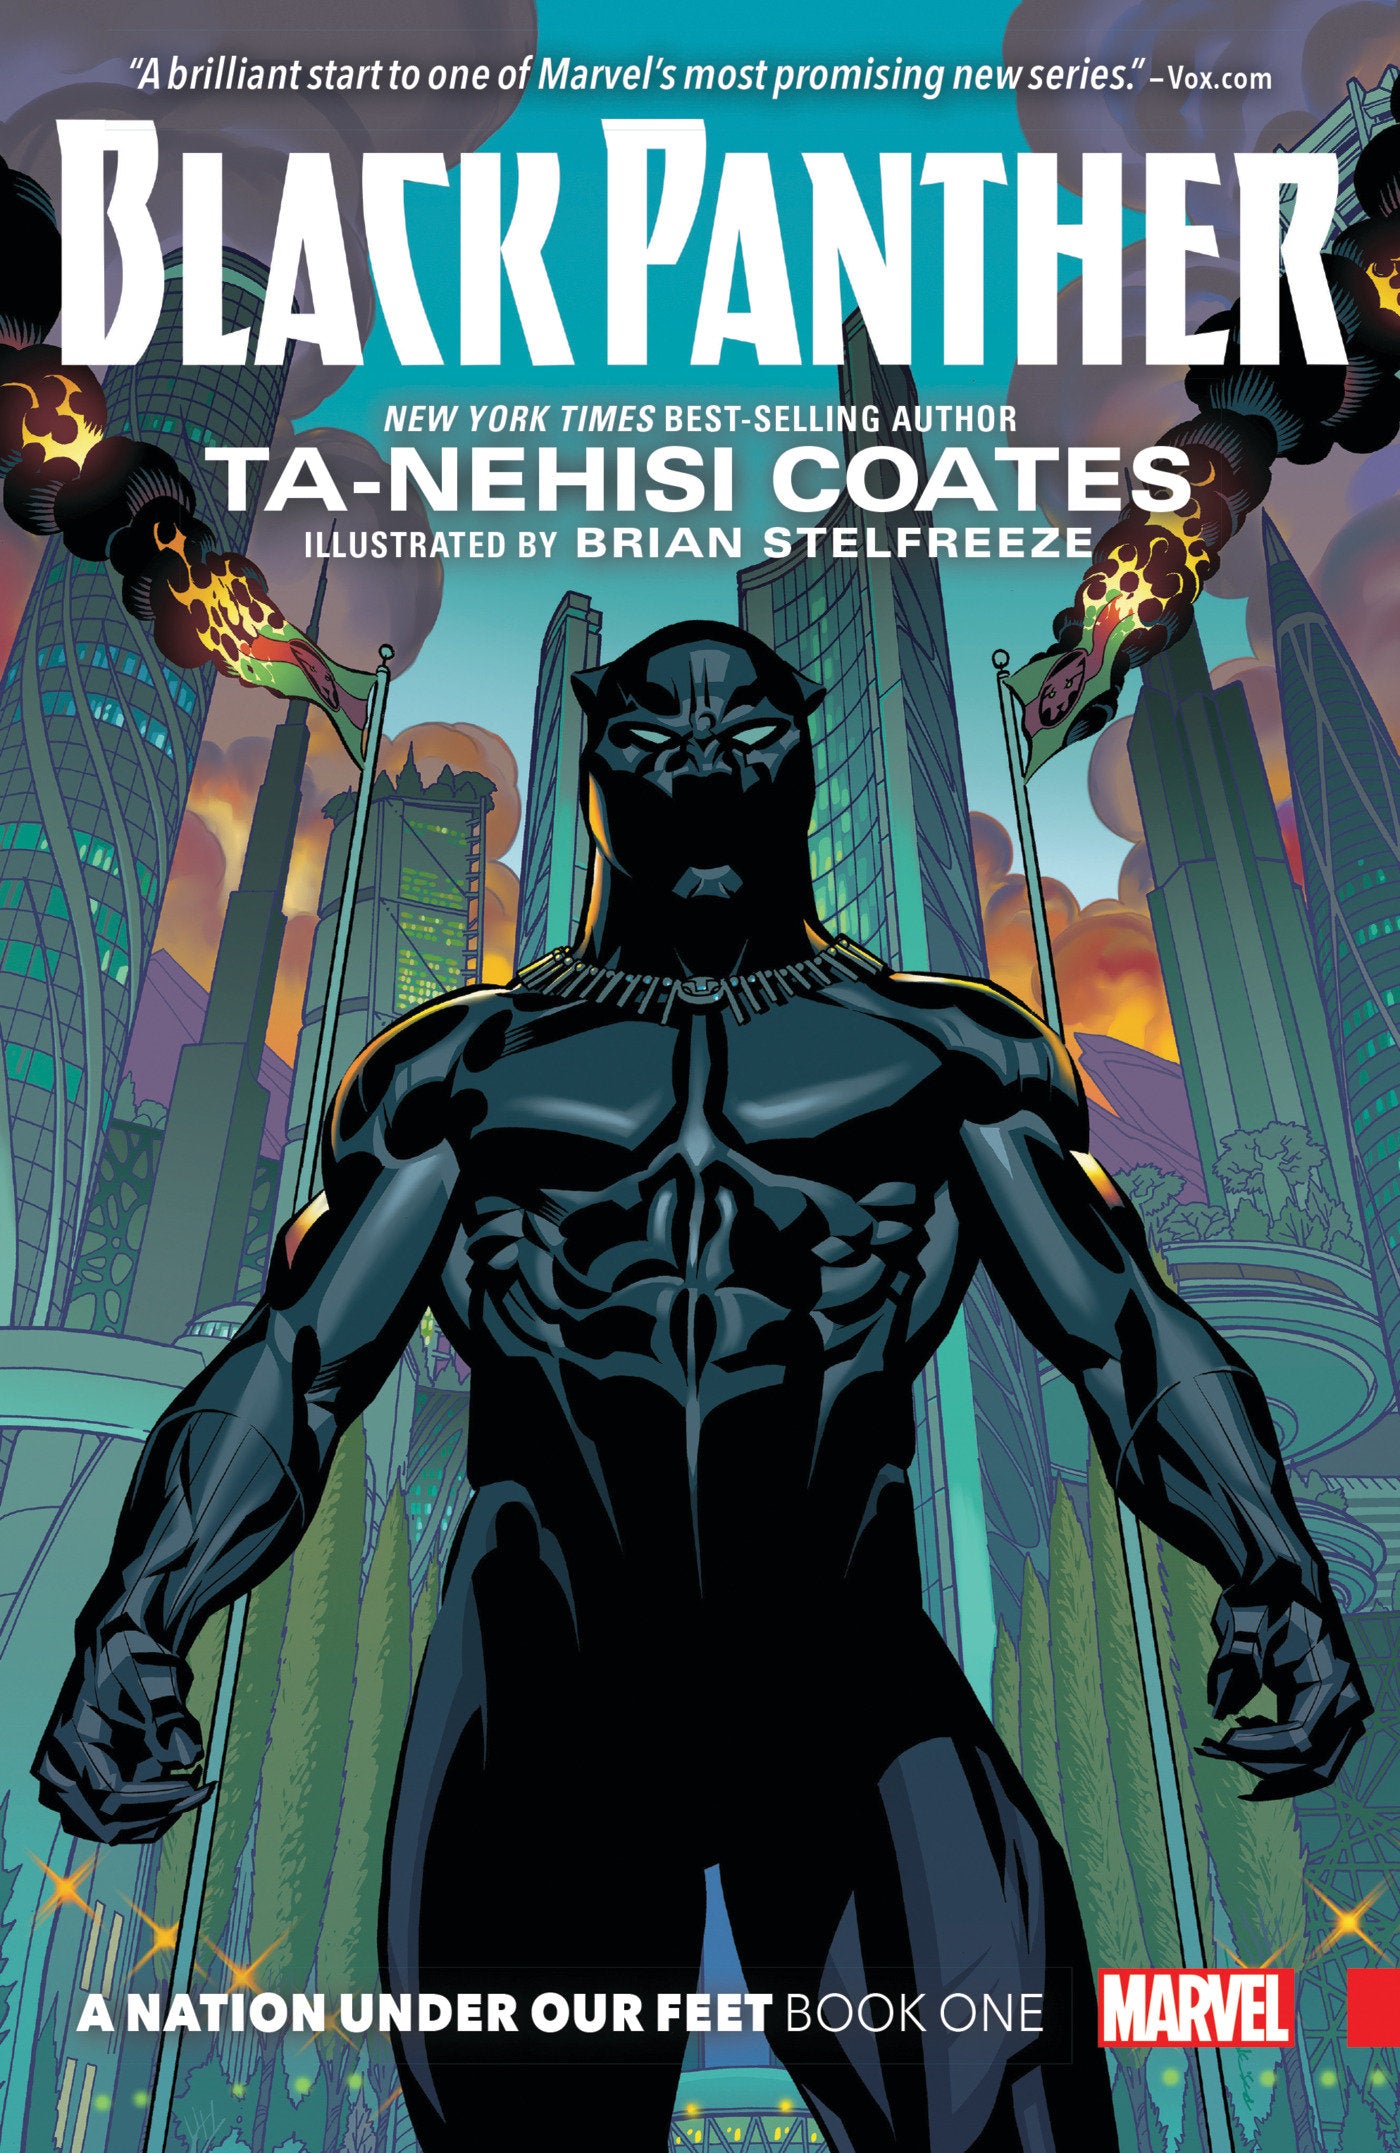 BLACK PANTHER: A NATION UNDER OUR FEET BOOK 1 TRADE PAPERBACK